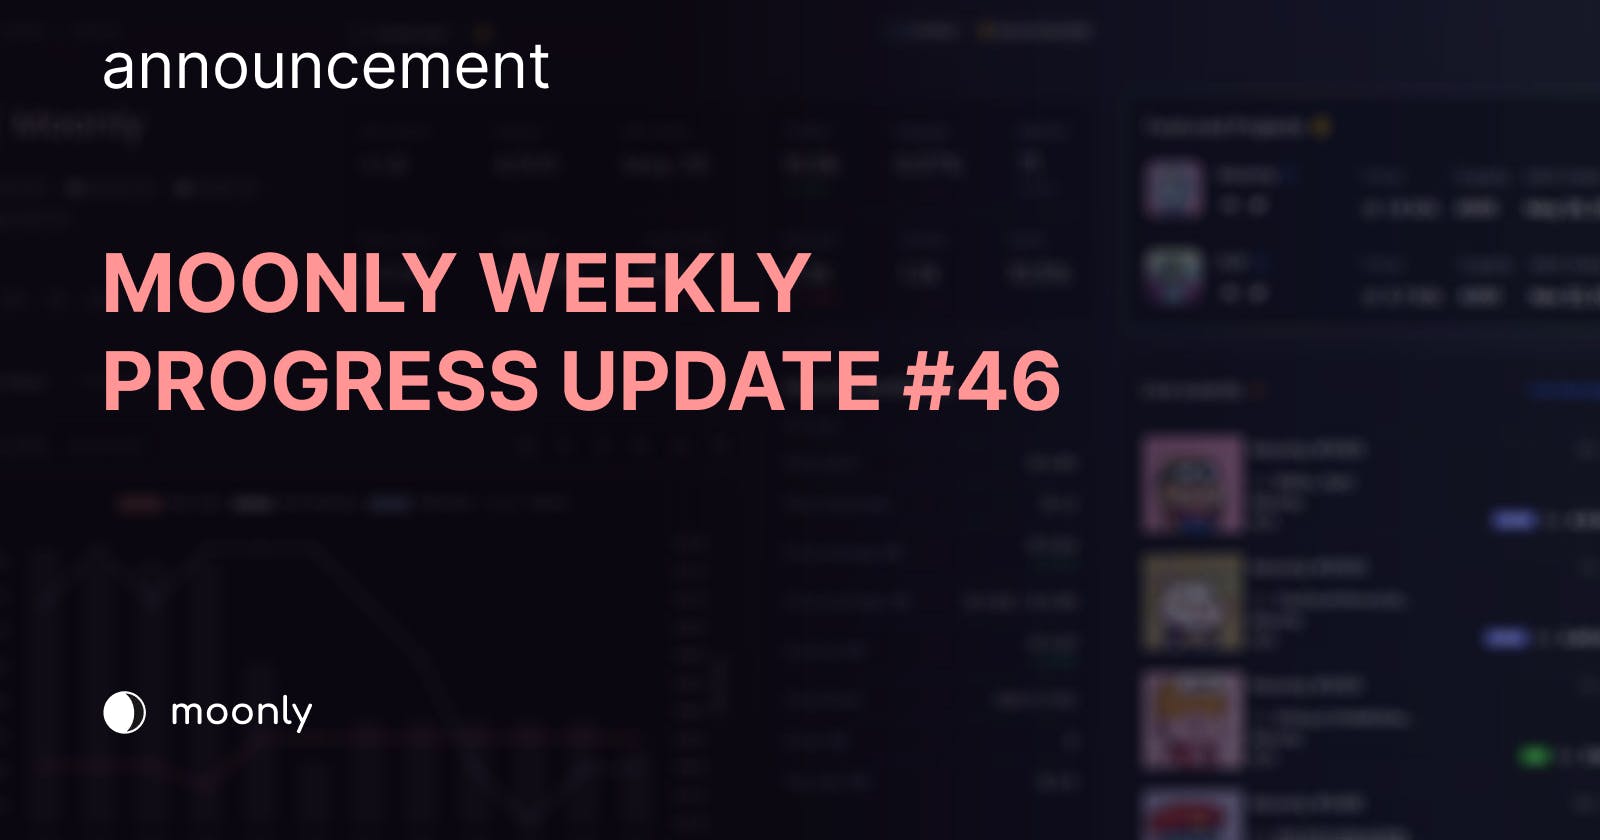 Moonly weekly progress update #46 - New design for a login page